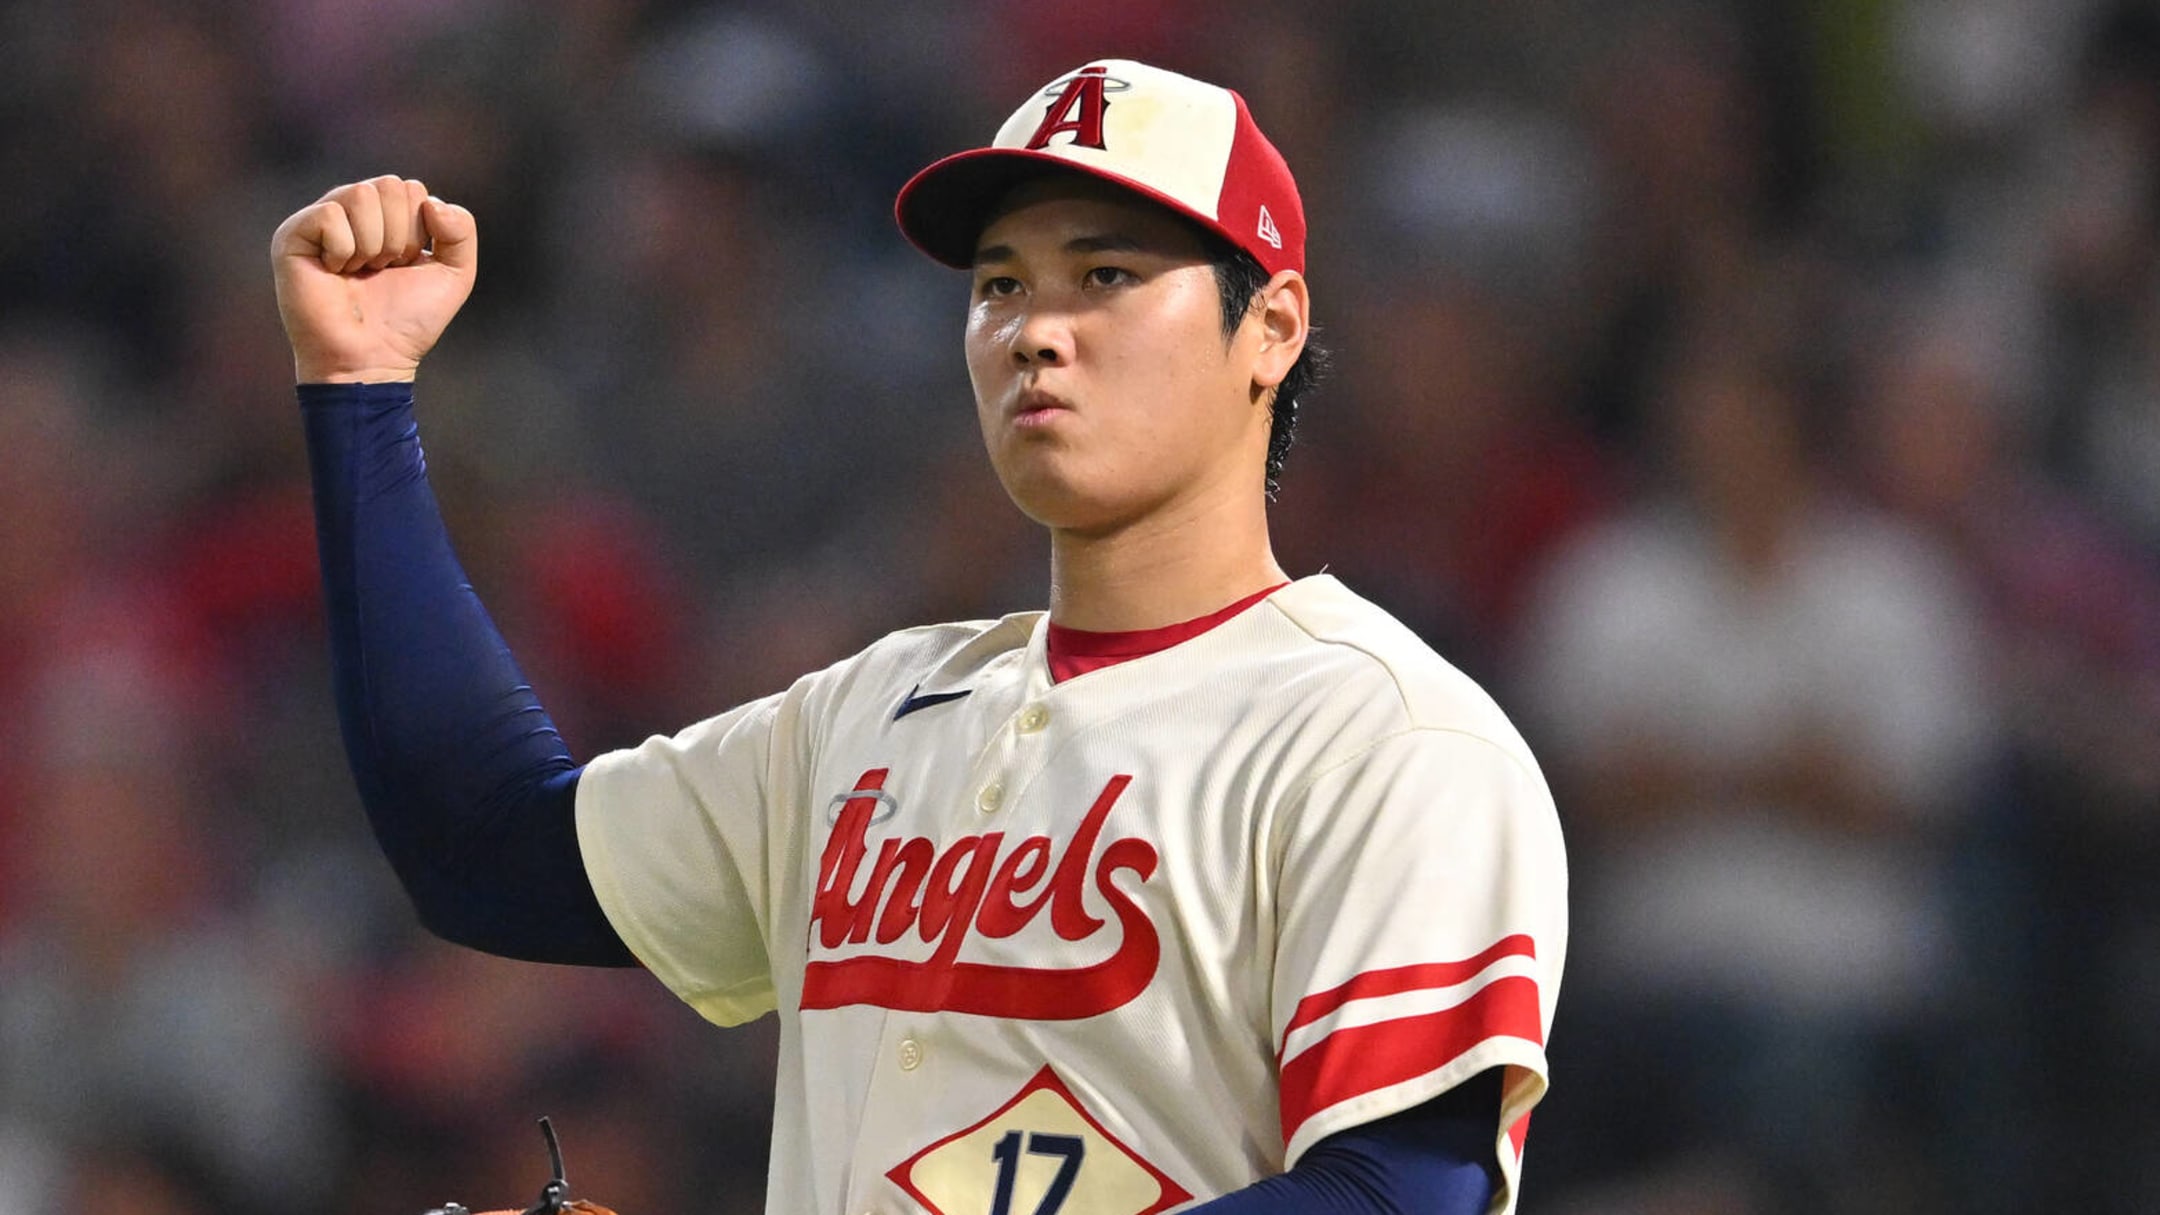 Angels' Shohei Ohtani gets record $30 million contract to avoid